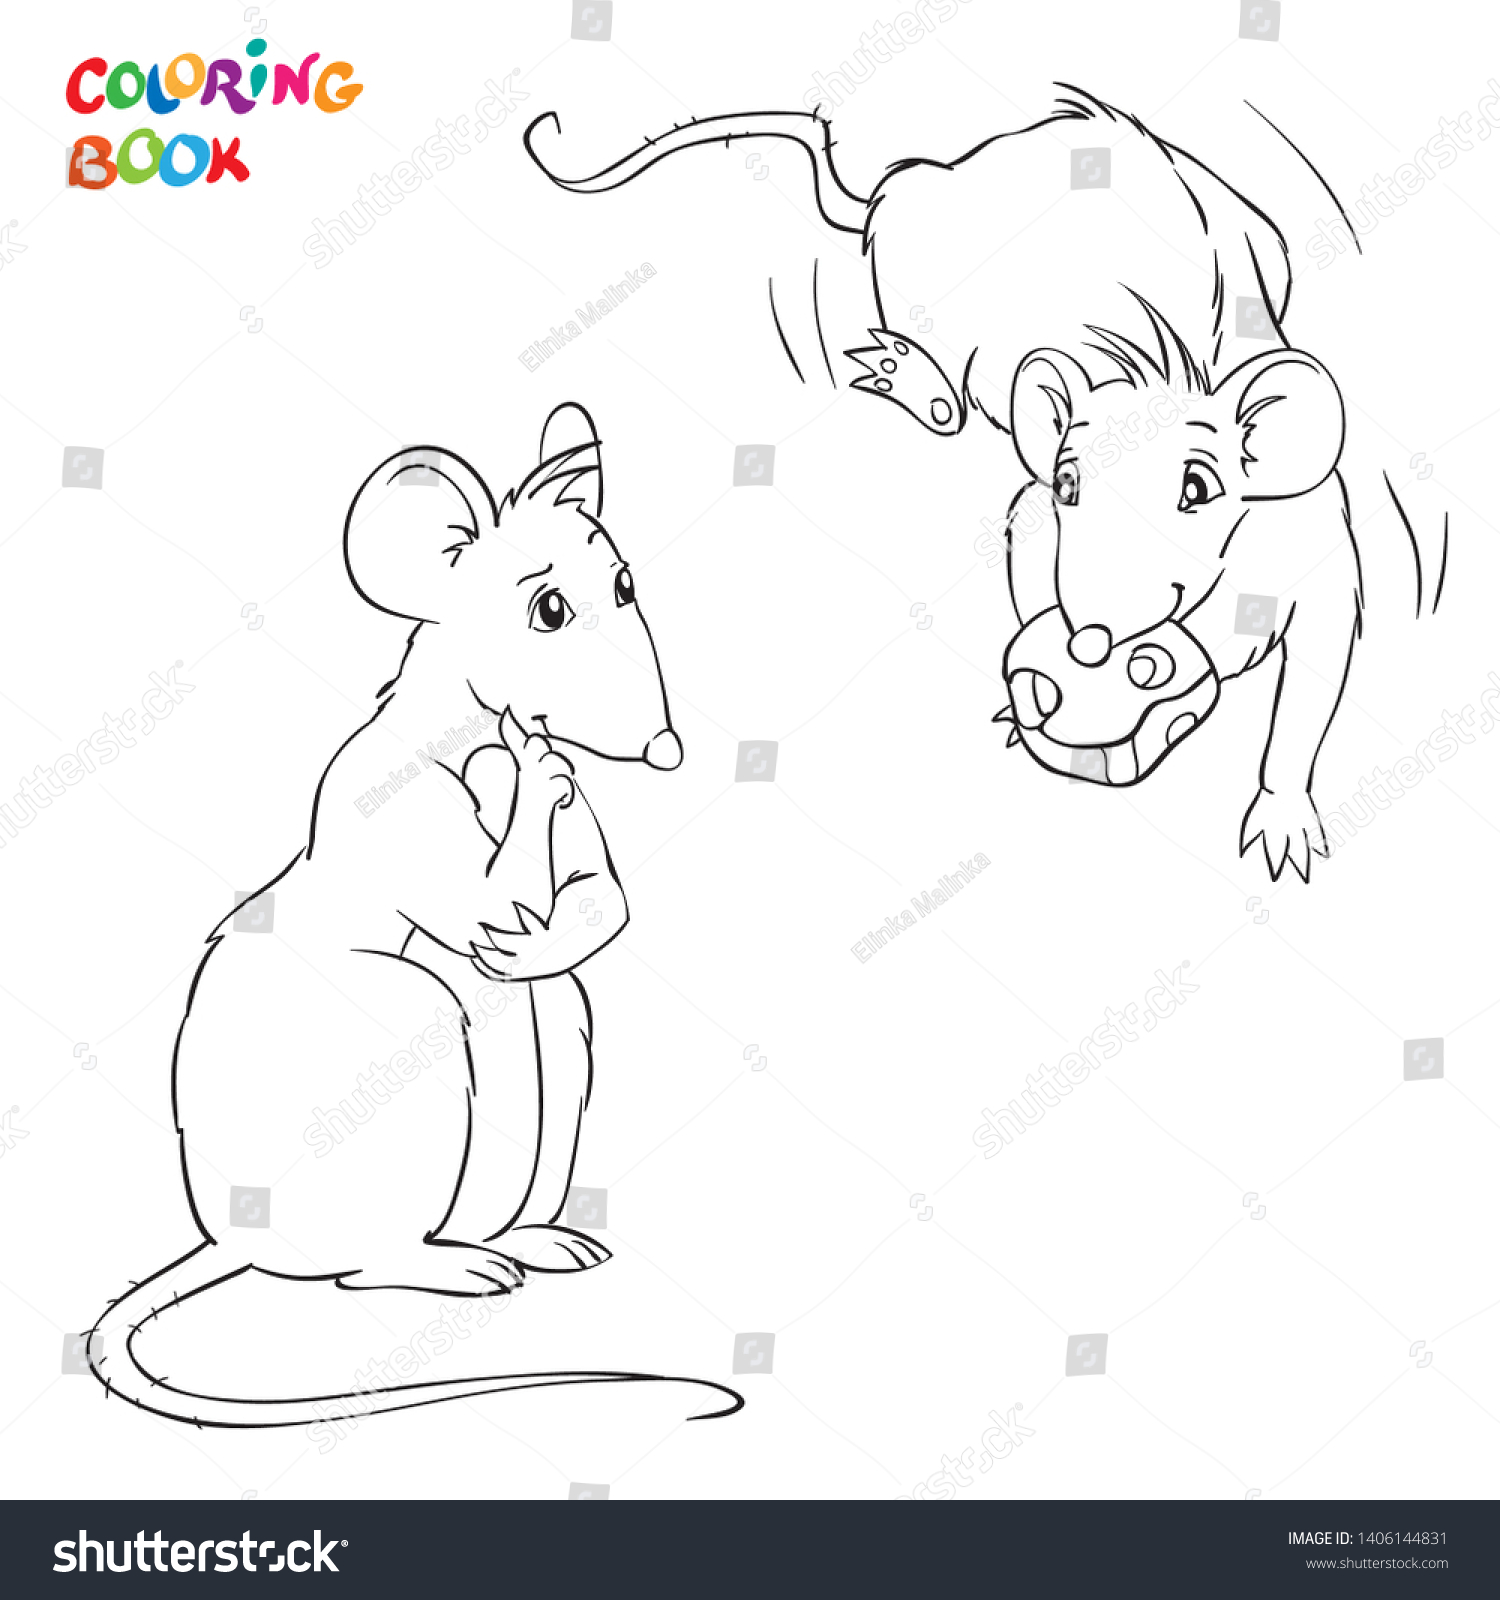 Coloring book two rats rat cheese stock vector royalty free